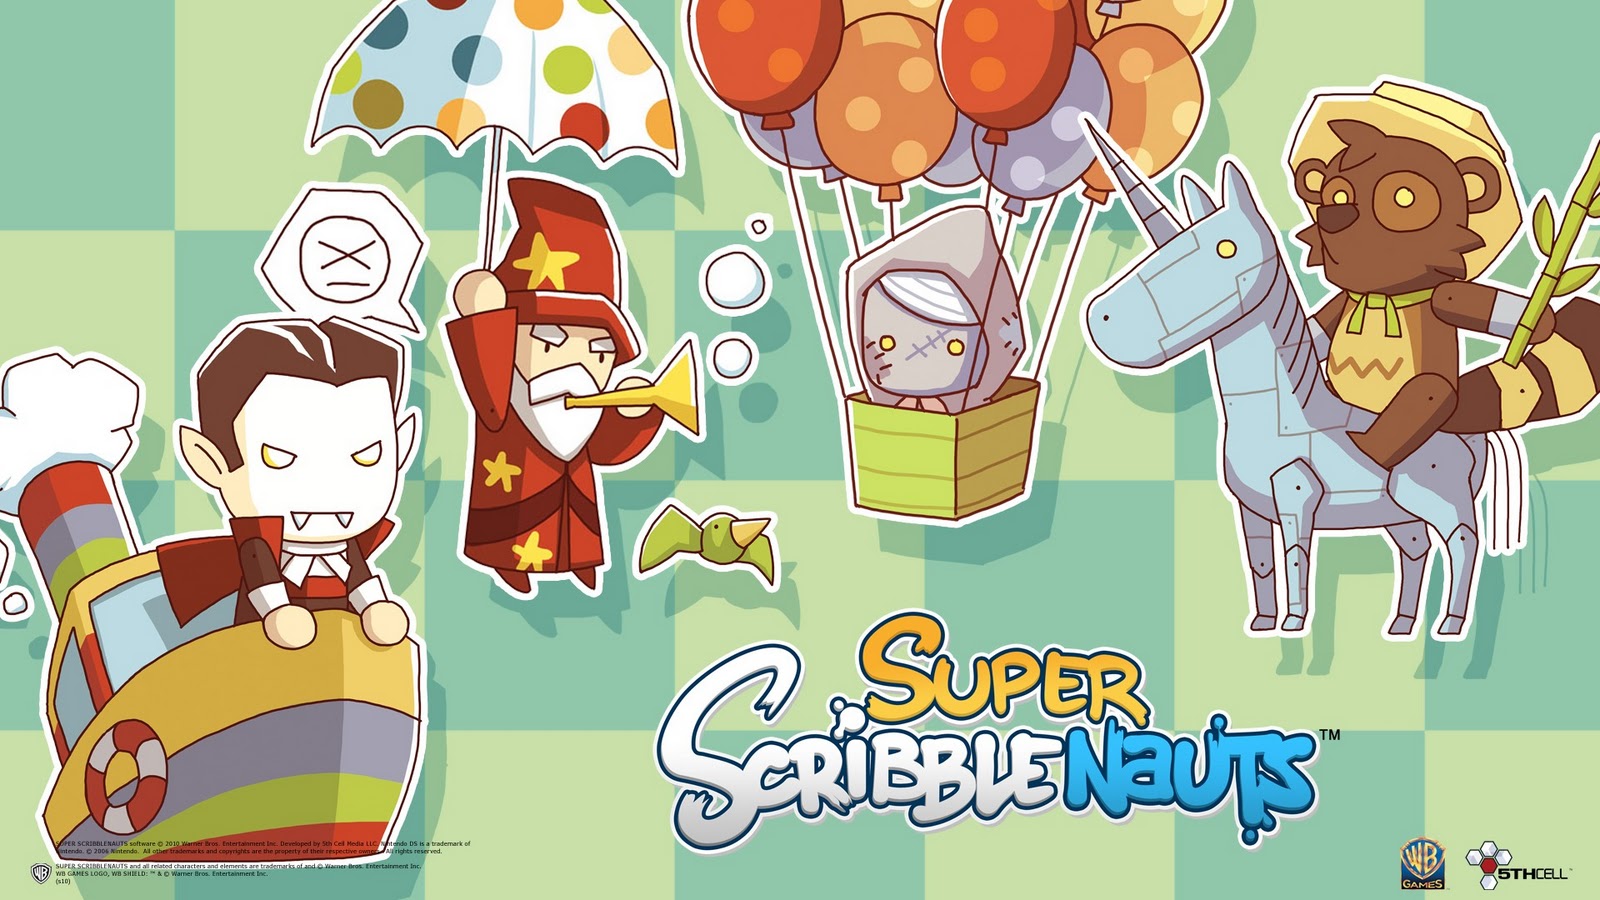 The original Scribblenauts made a splash on the DS gaming scene by allowing...